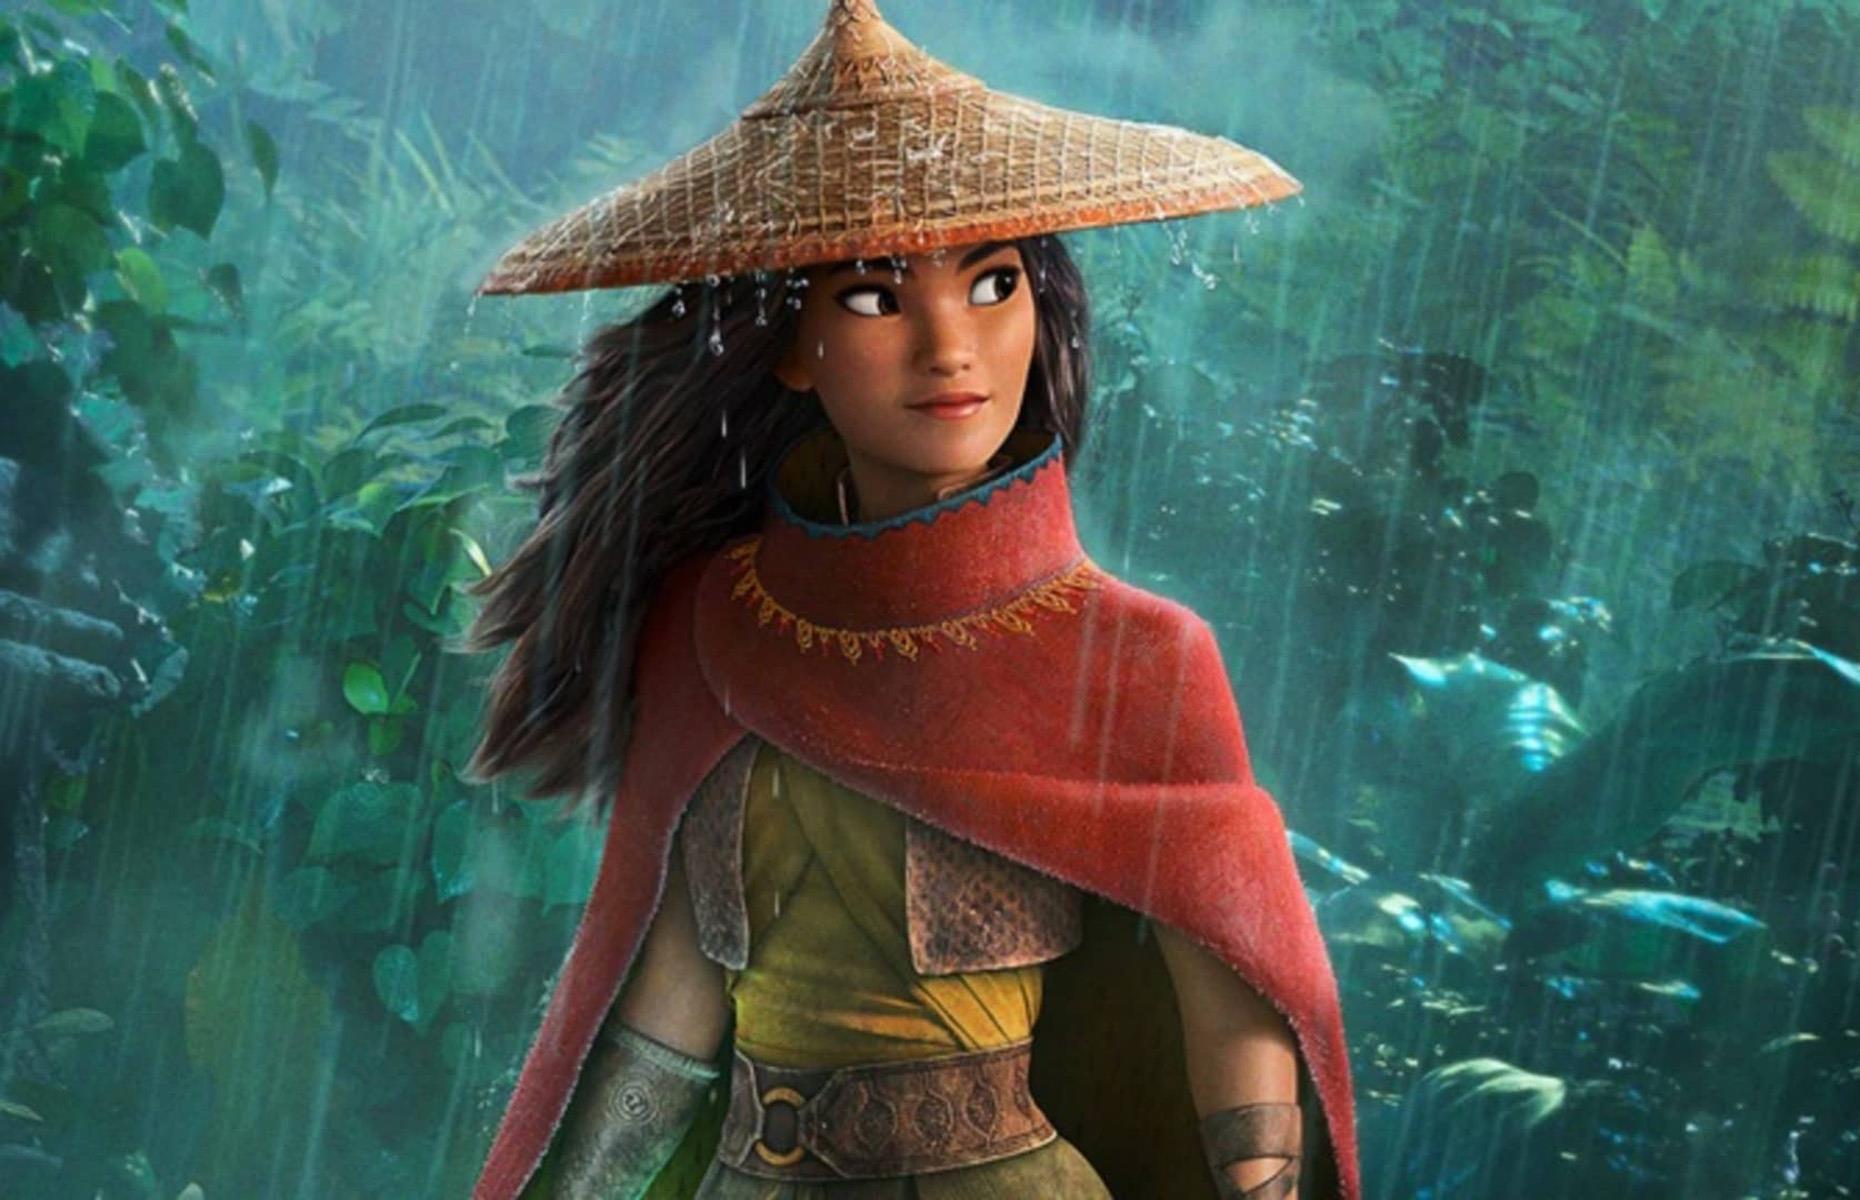 <p>When the trailer for <em>Raya and the Last Dragon</em> dropped, it was showered with praise for its diversity, with fans seemingly eager to meet the first-ever Southeast Asian Disney princess.</p>  <p>However, this buzz failed to translate to silver screen success. The 2021 flick grossed just $130 million globally despite an estimated production budget in excess of $100 million. </p>  <p>According to <em>Screen Rant,</em> <em>Raya and the Last Dragon</em> lost Disney $120 million once costs such as marketing and distribution were factored in. The film was also another unfortunate victim of the pandemic, while the studio's decision to release it simultaneously in cinemas and via its streaming platform was, once again, also deemed questionable. </p>